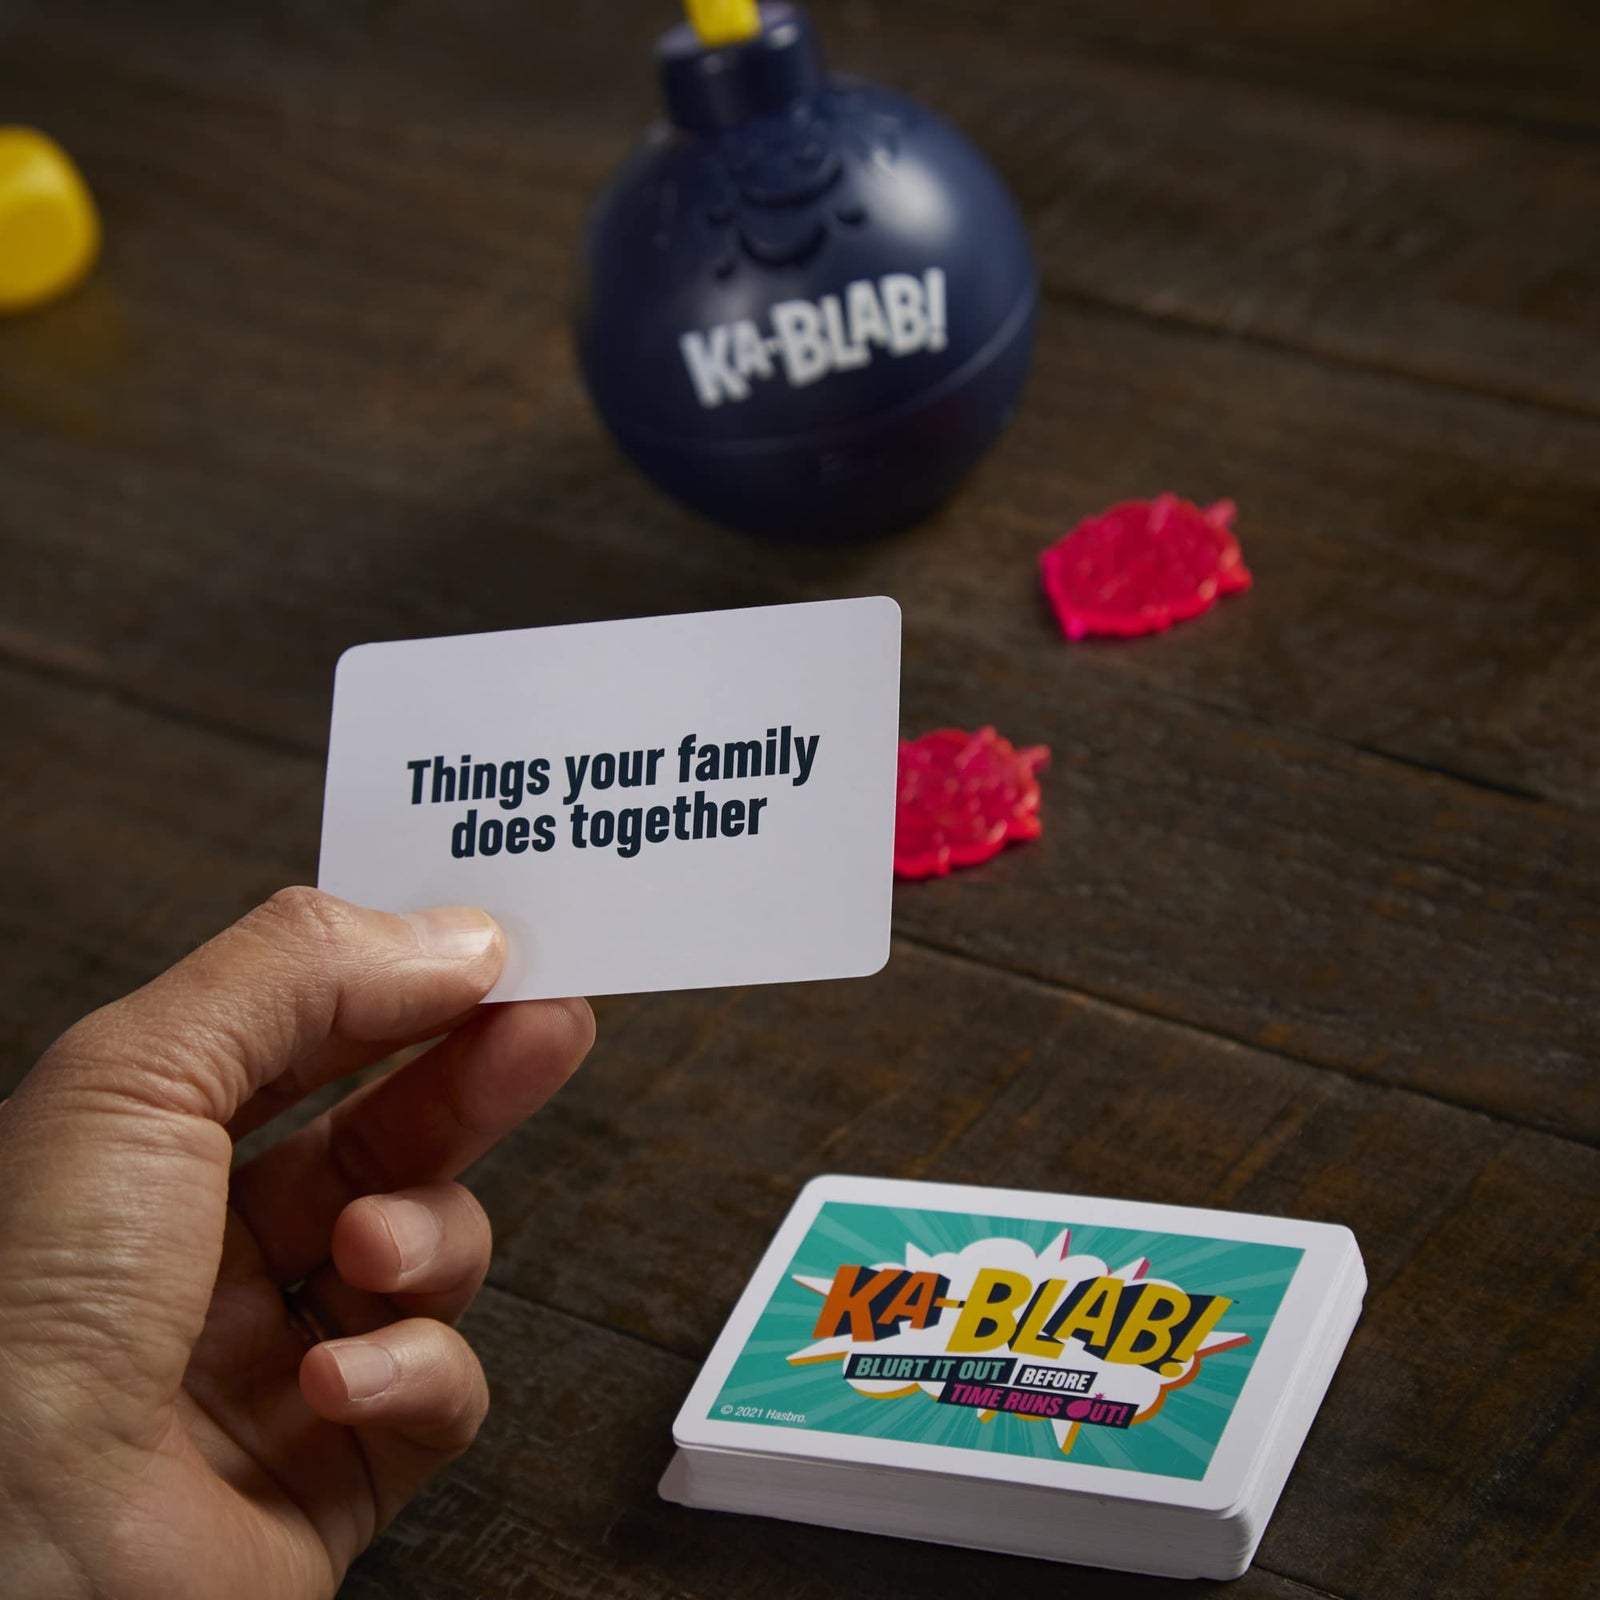 Ka-Blab! Game for Families, Teens and Kids Ages 10 and Up, Family-Friendly Party Game for 2-6 Players, from The Makers of Scattergories